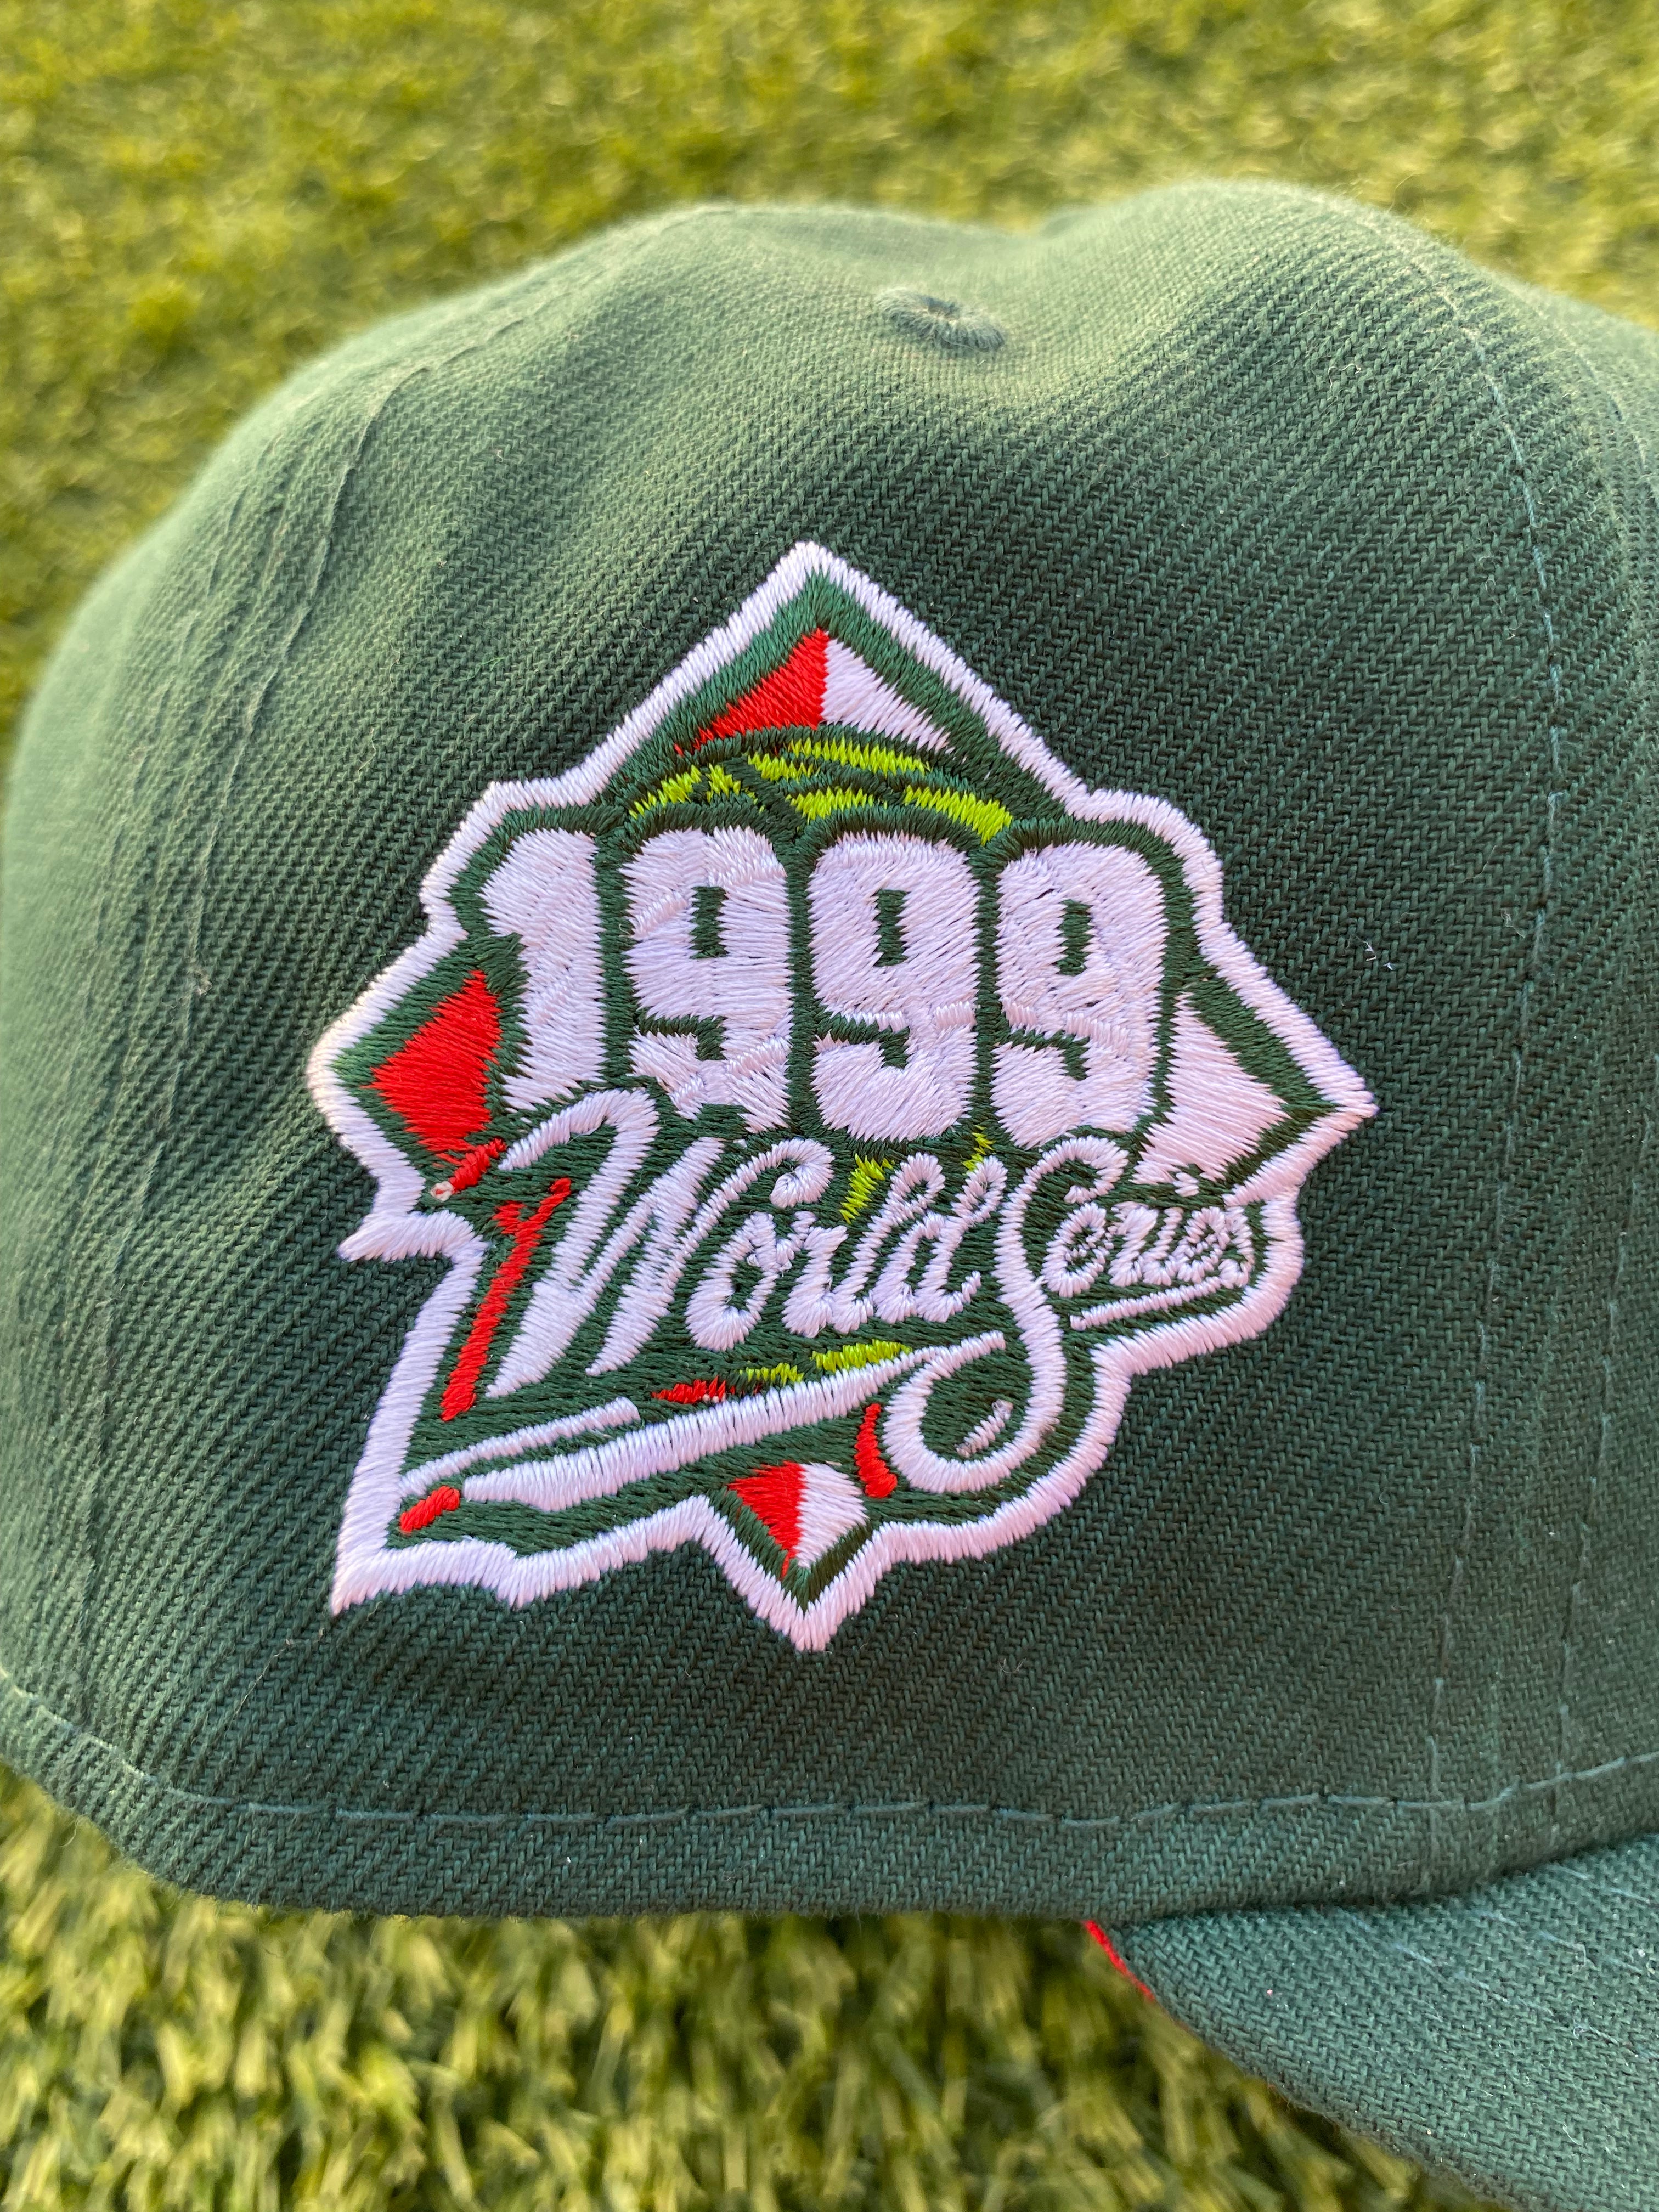 Hat Club Watermelon New York Yankees 1999 World Series Patch Red